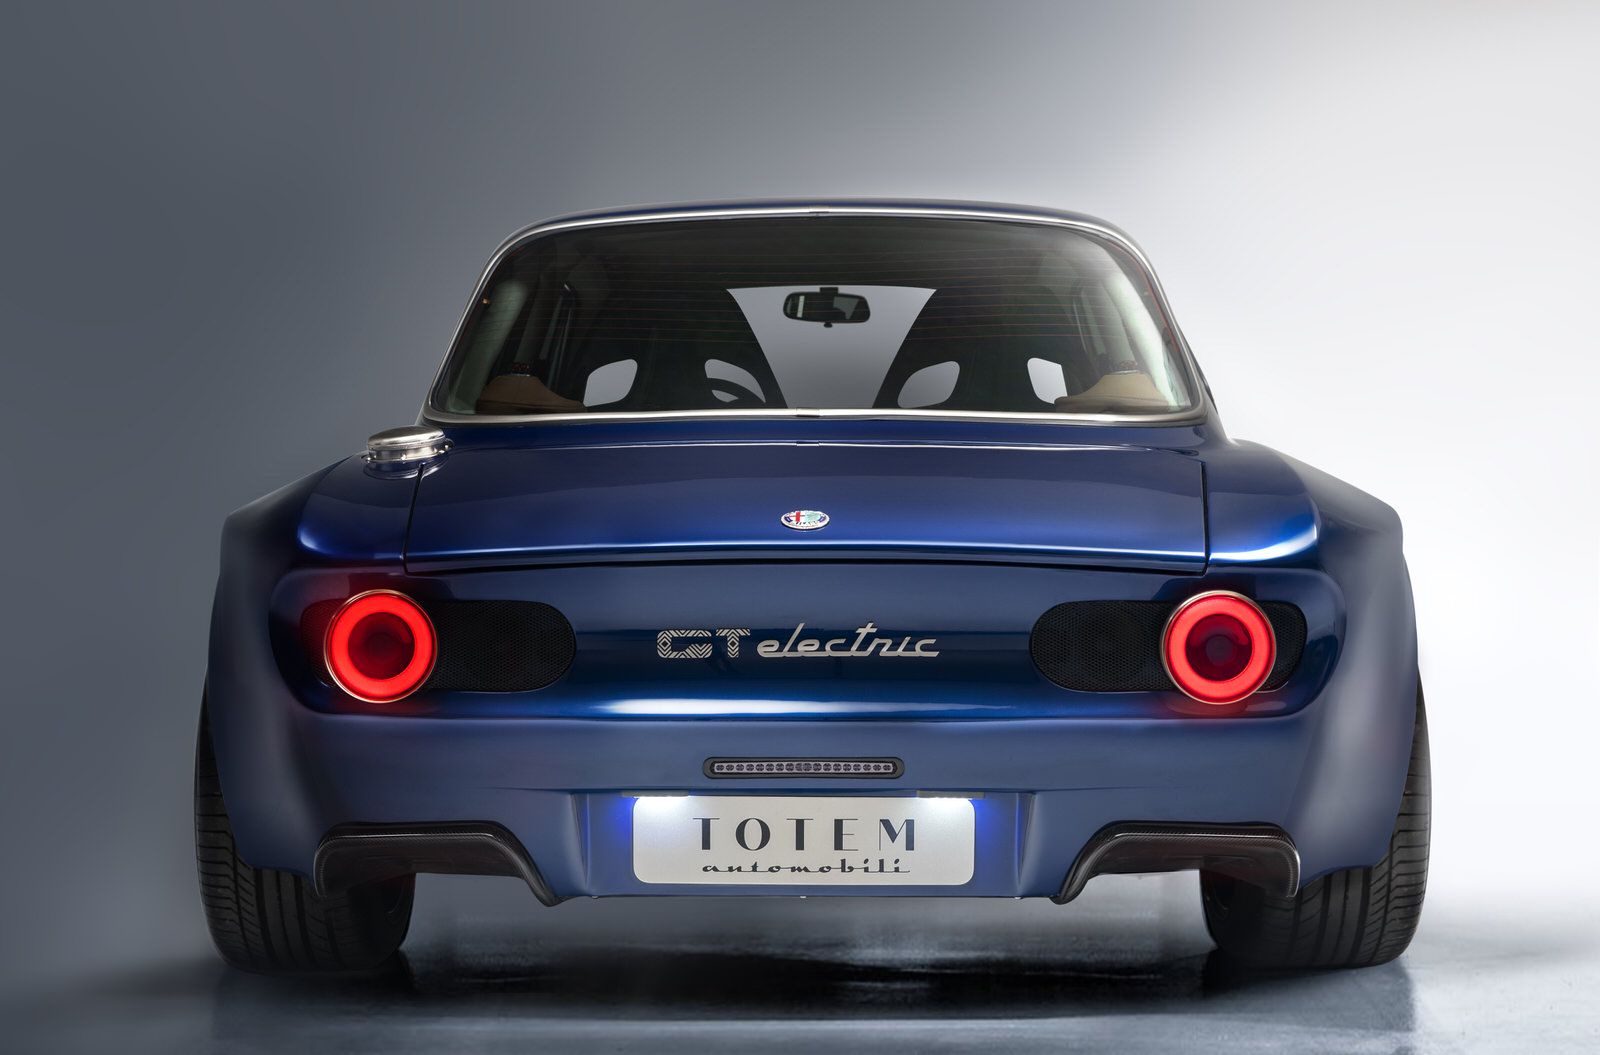 Totem Automobili | The Giulia Gt Electric Is One Gorgeous Ev